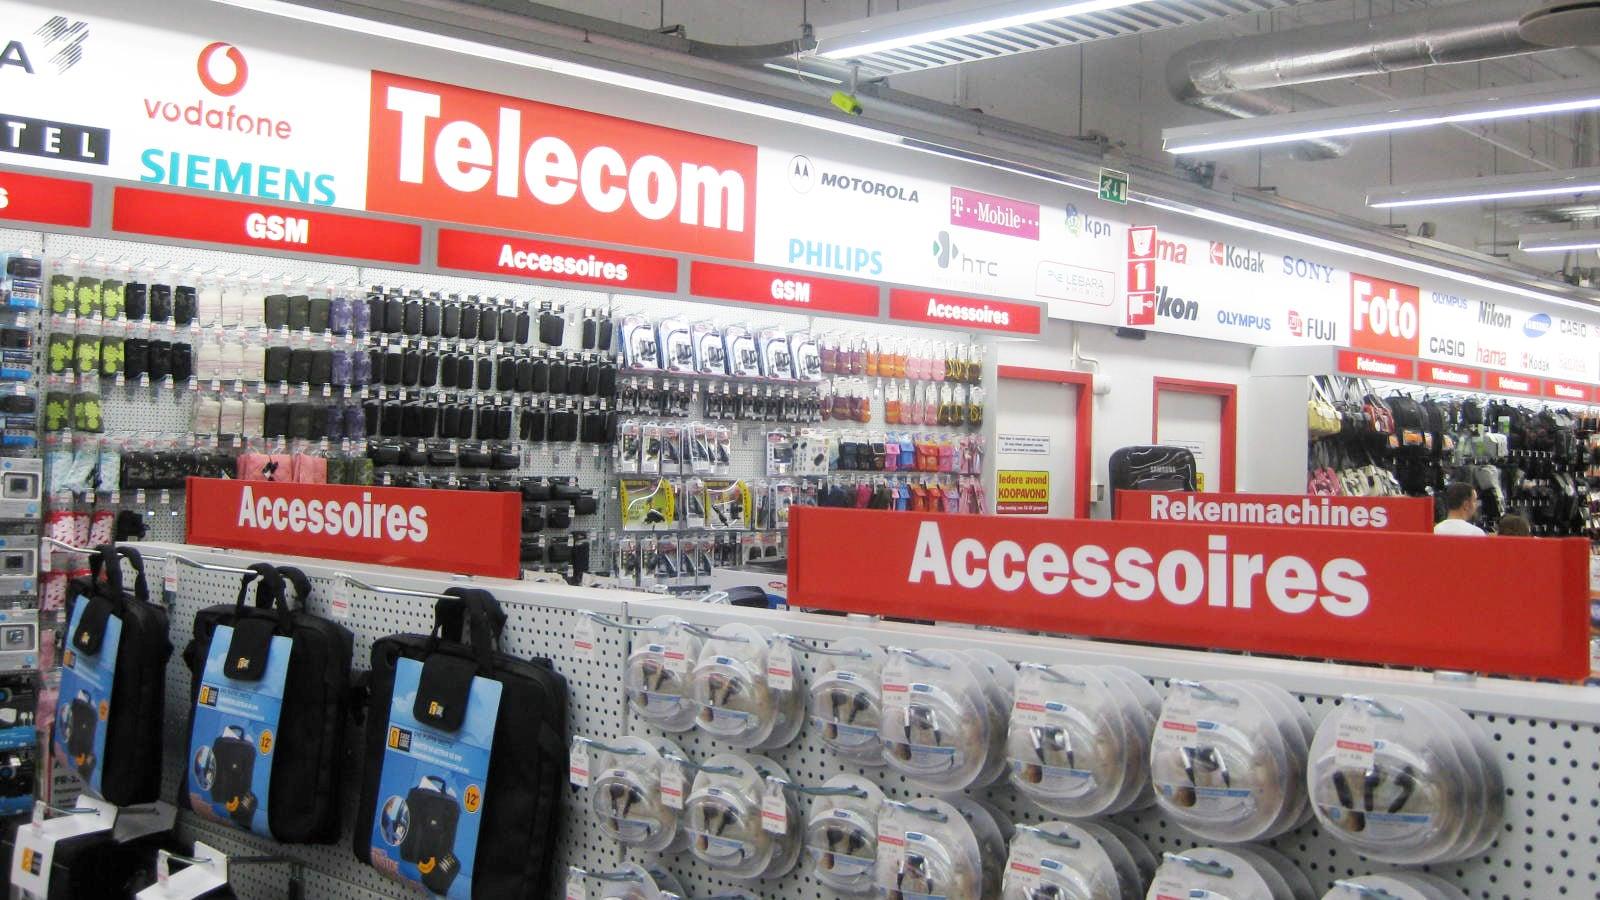 Large selection of electrical goods and accessories in Media Markt shop